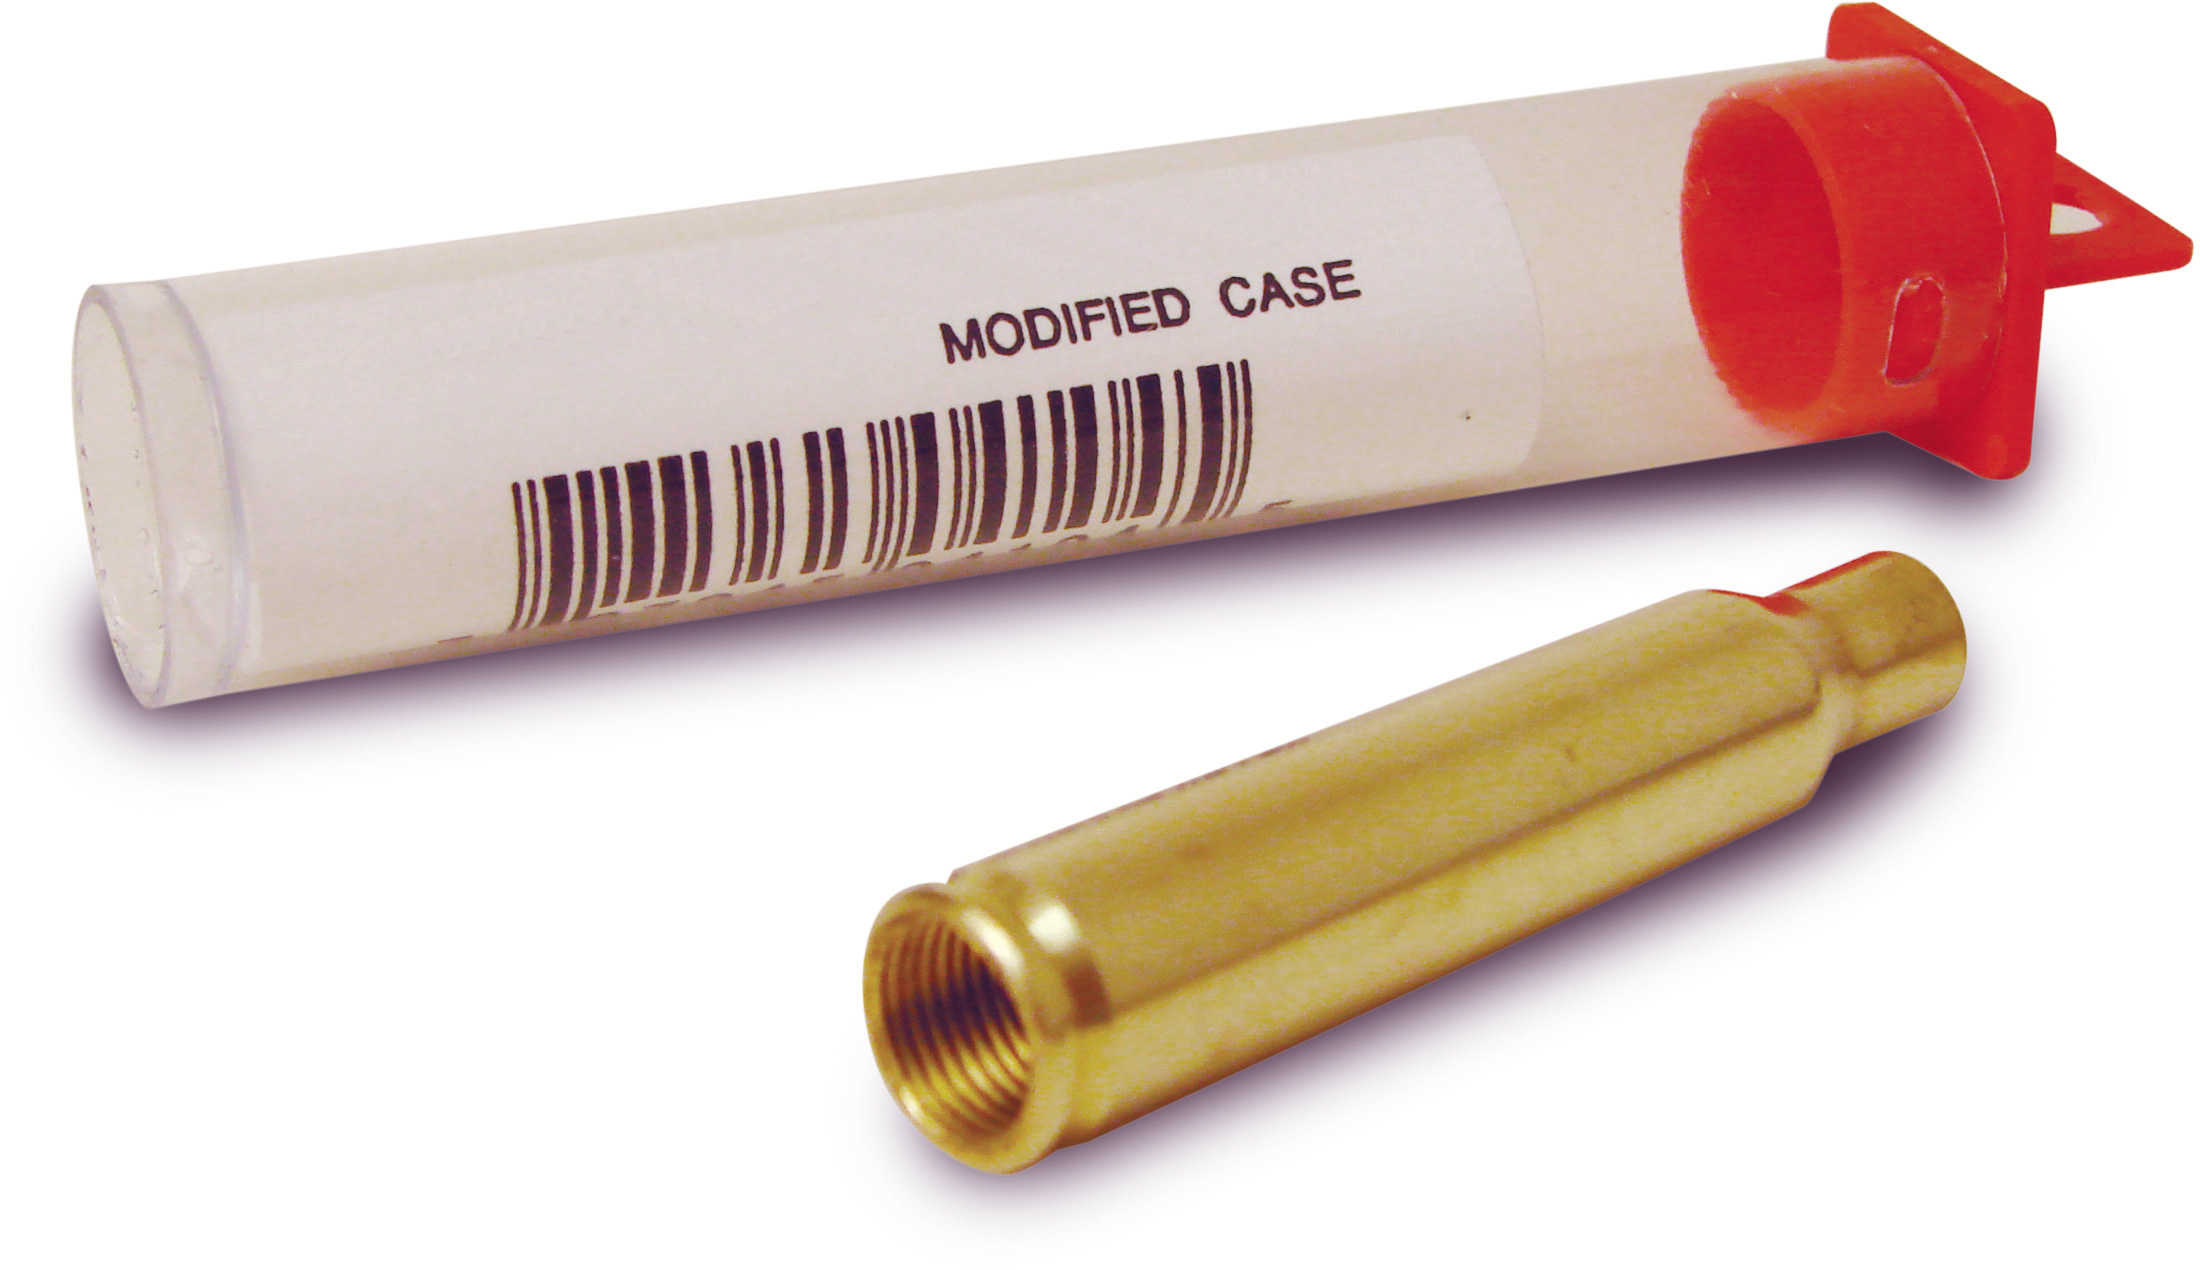 Hornady Lock-N-Load 223 Winchester Super Short Magnum Modified Case, Pack Of 1 Md: HDYB223